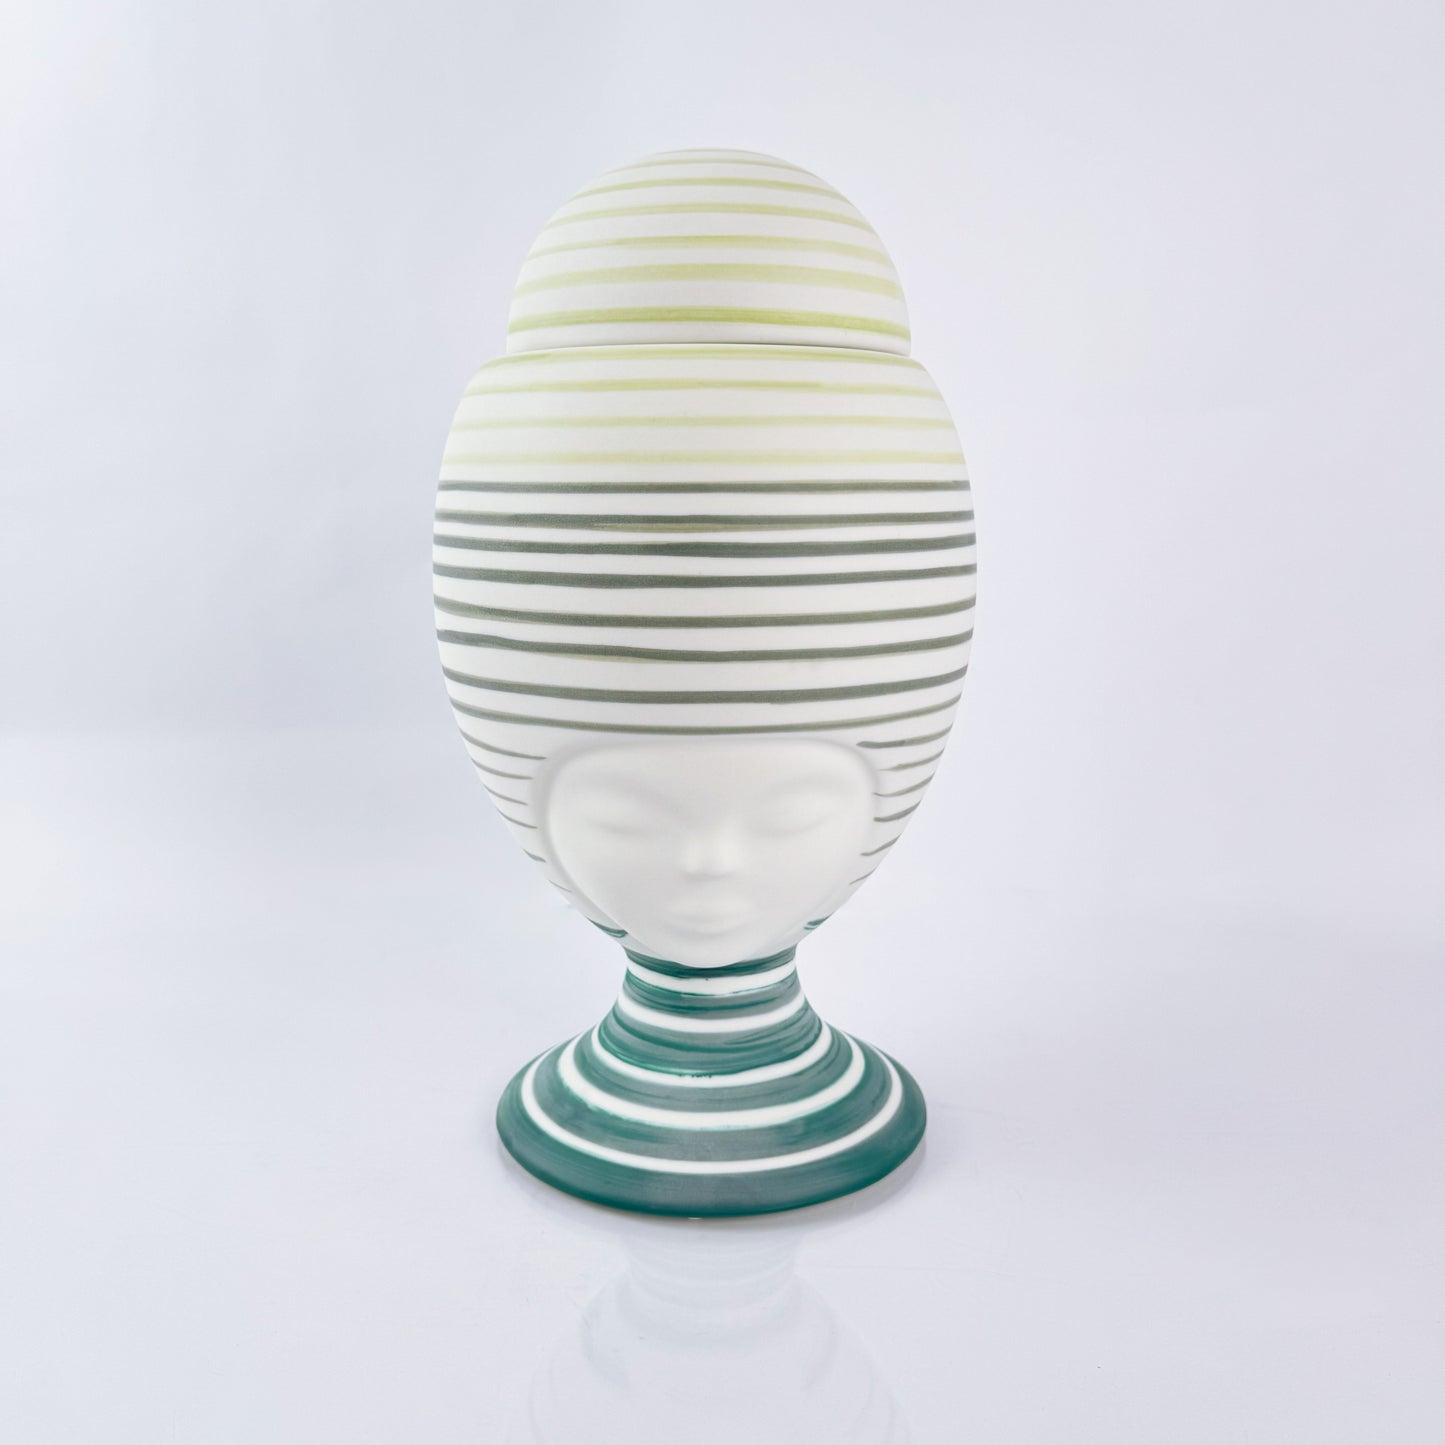 Sister Helen Rainbow Vase in Satin White with Green Details